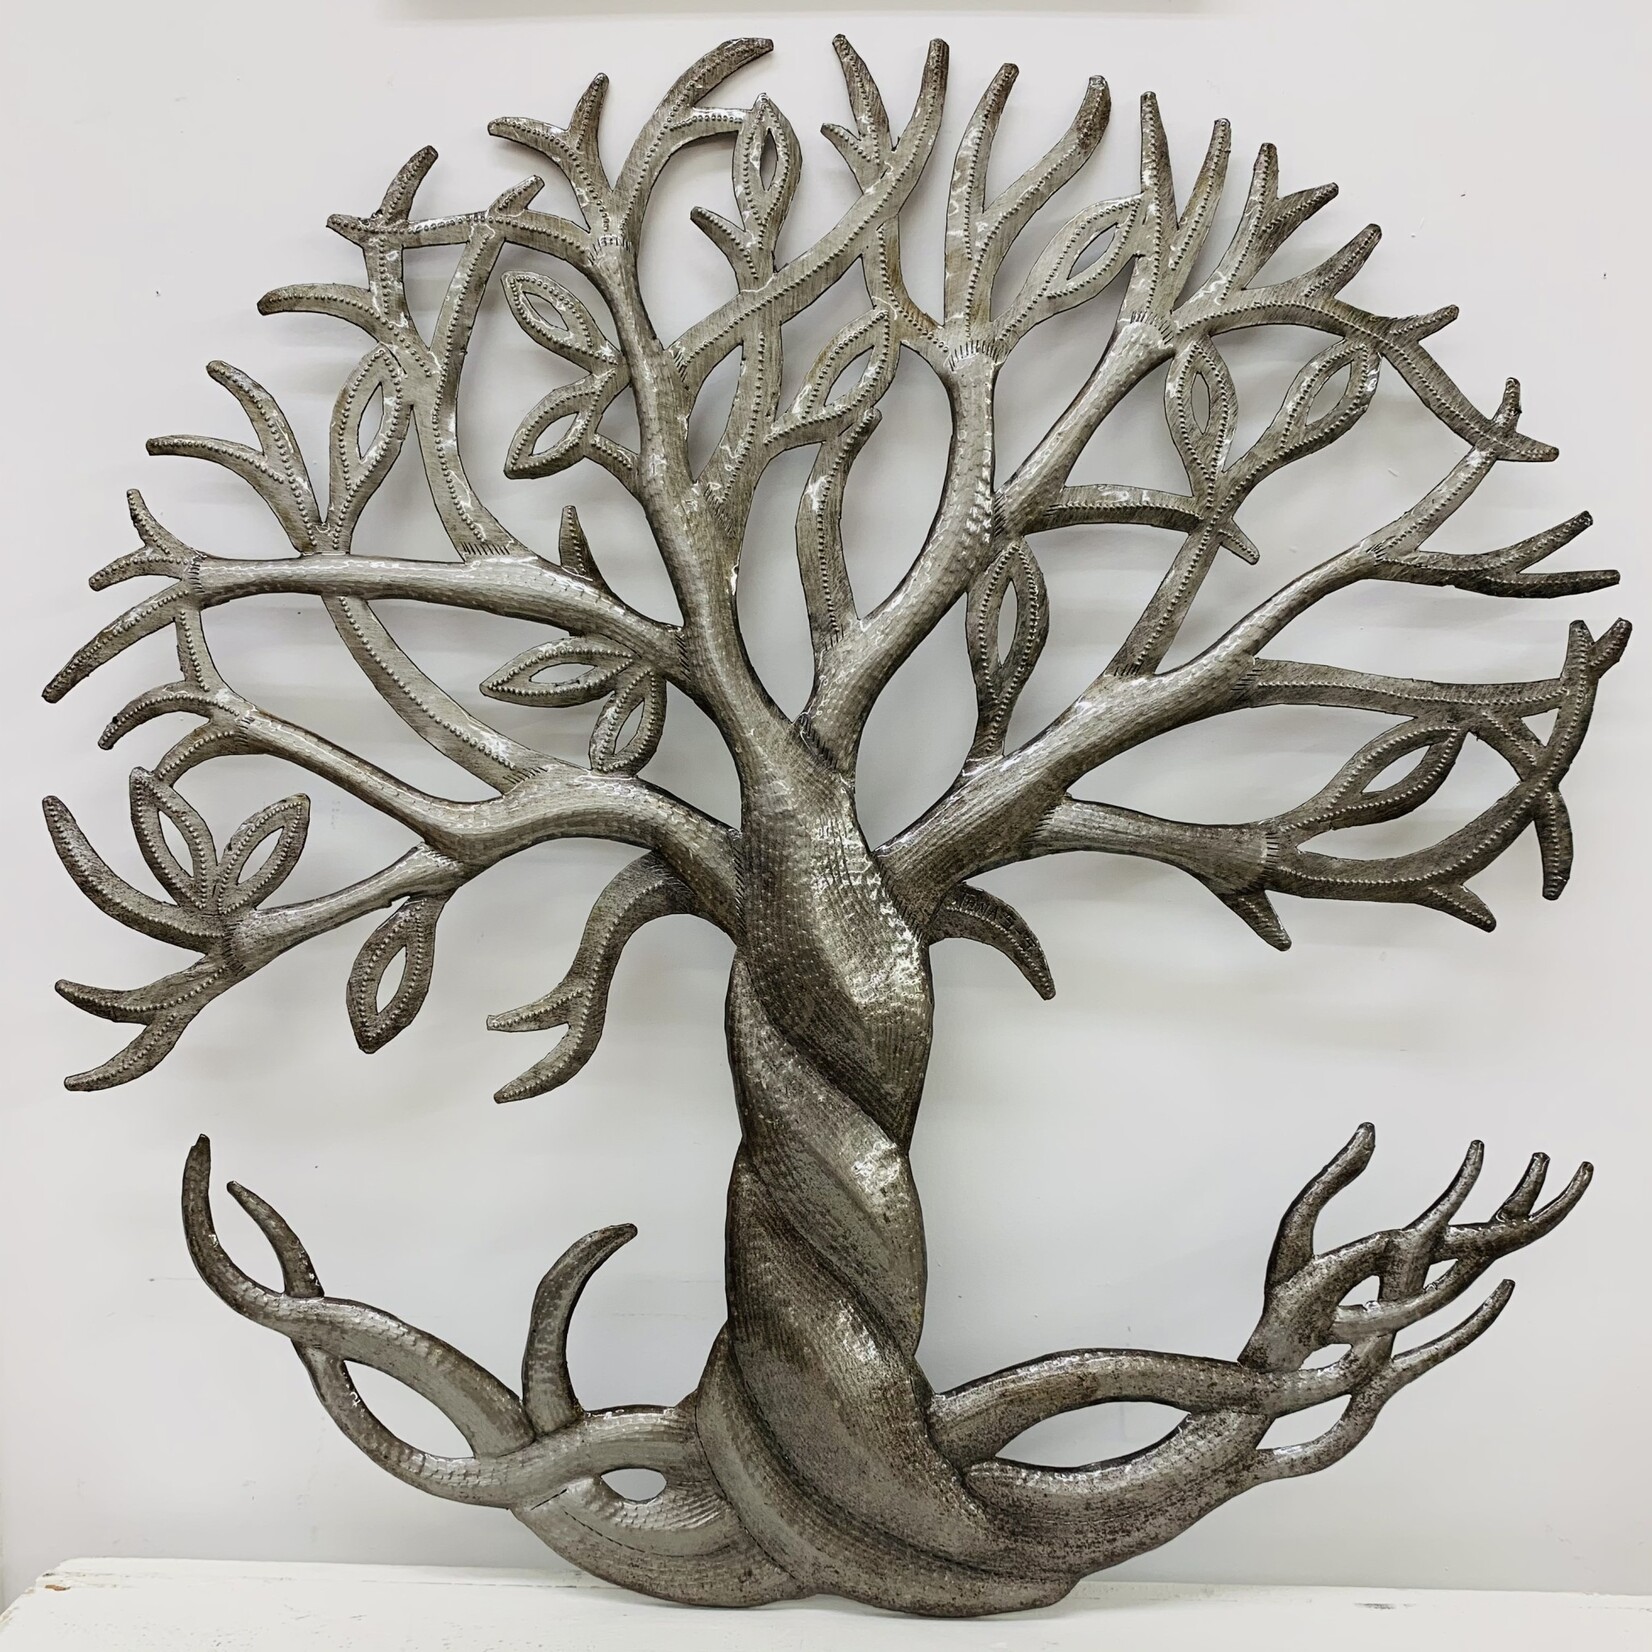 Ten Thousand Villages USA Roots and Leaves Cut Metal Art, Haiti